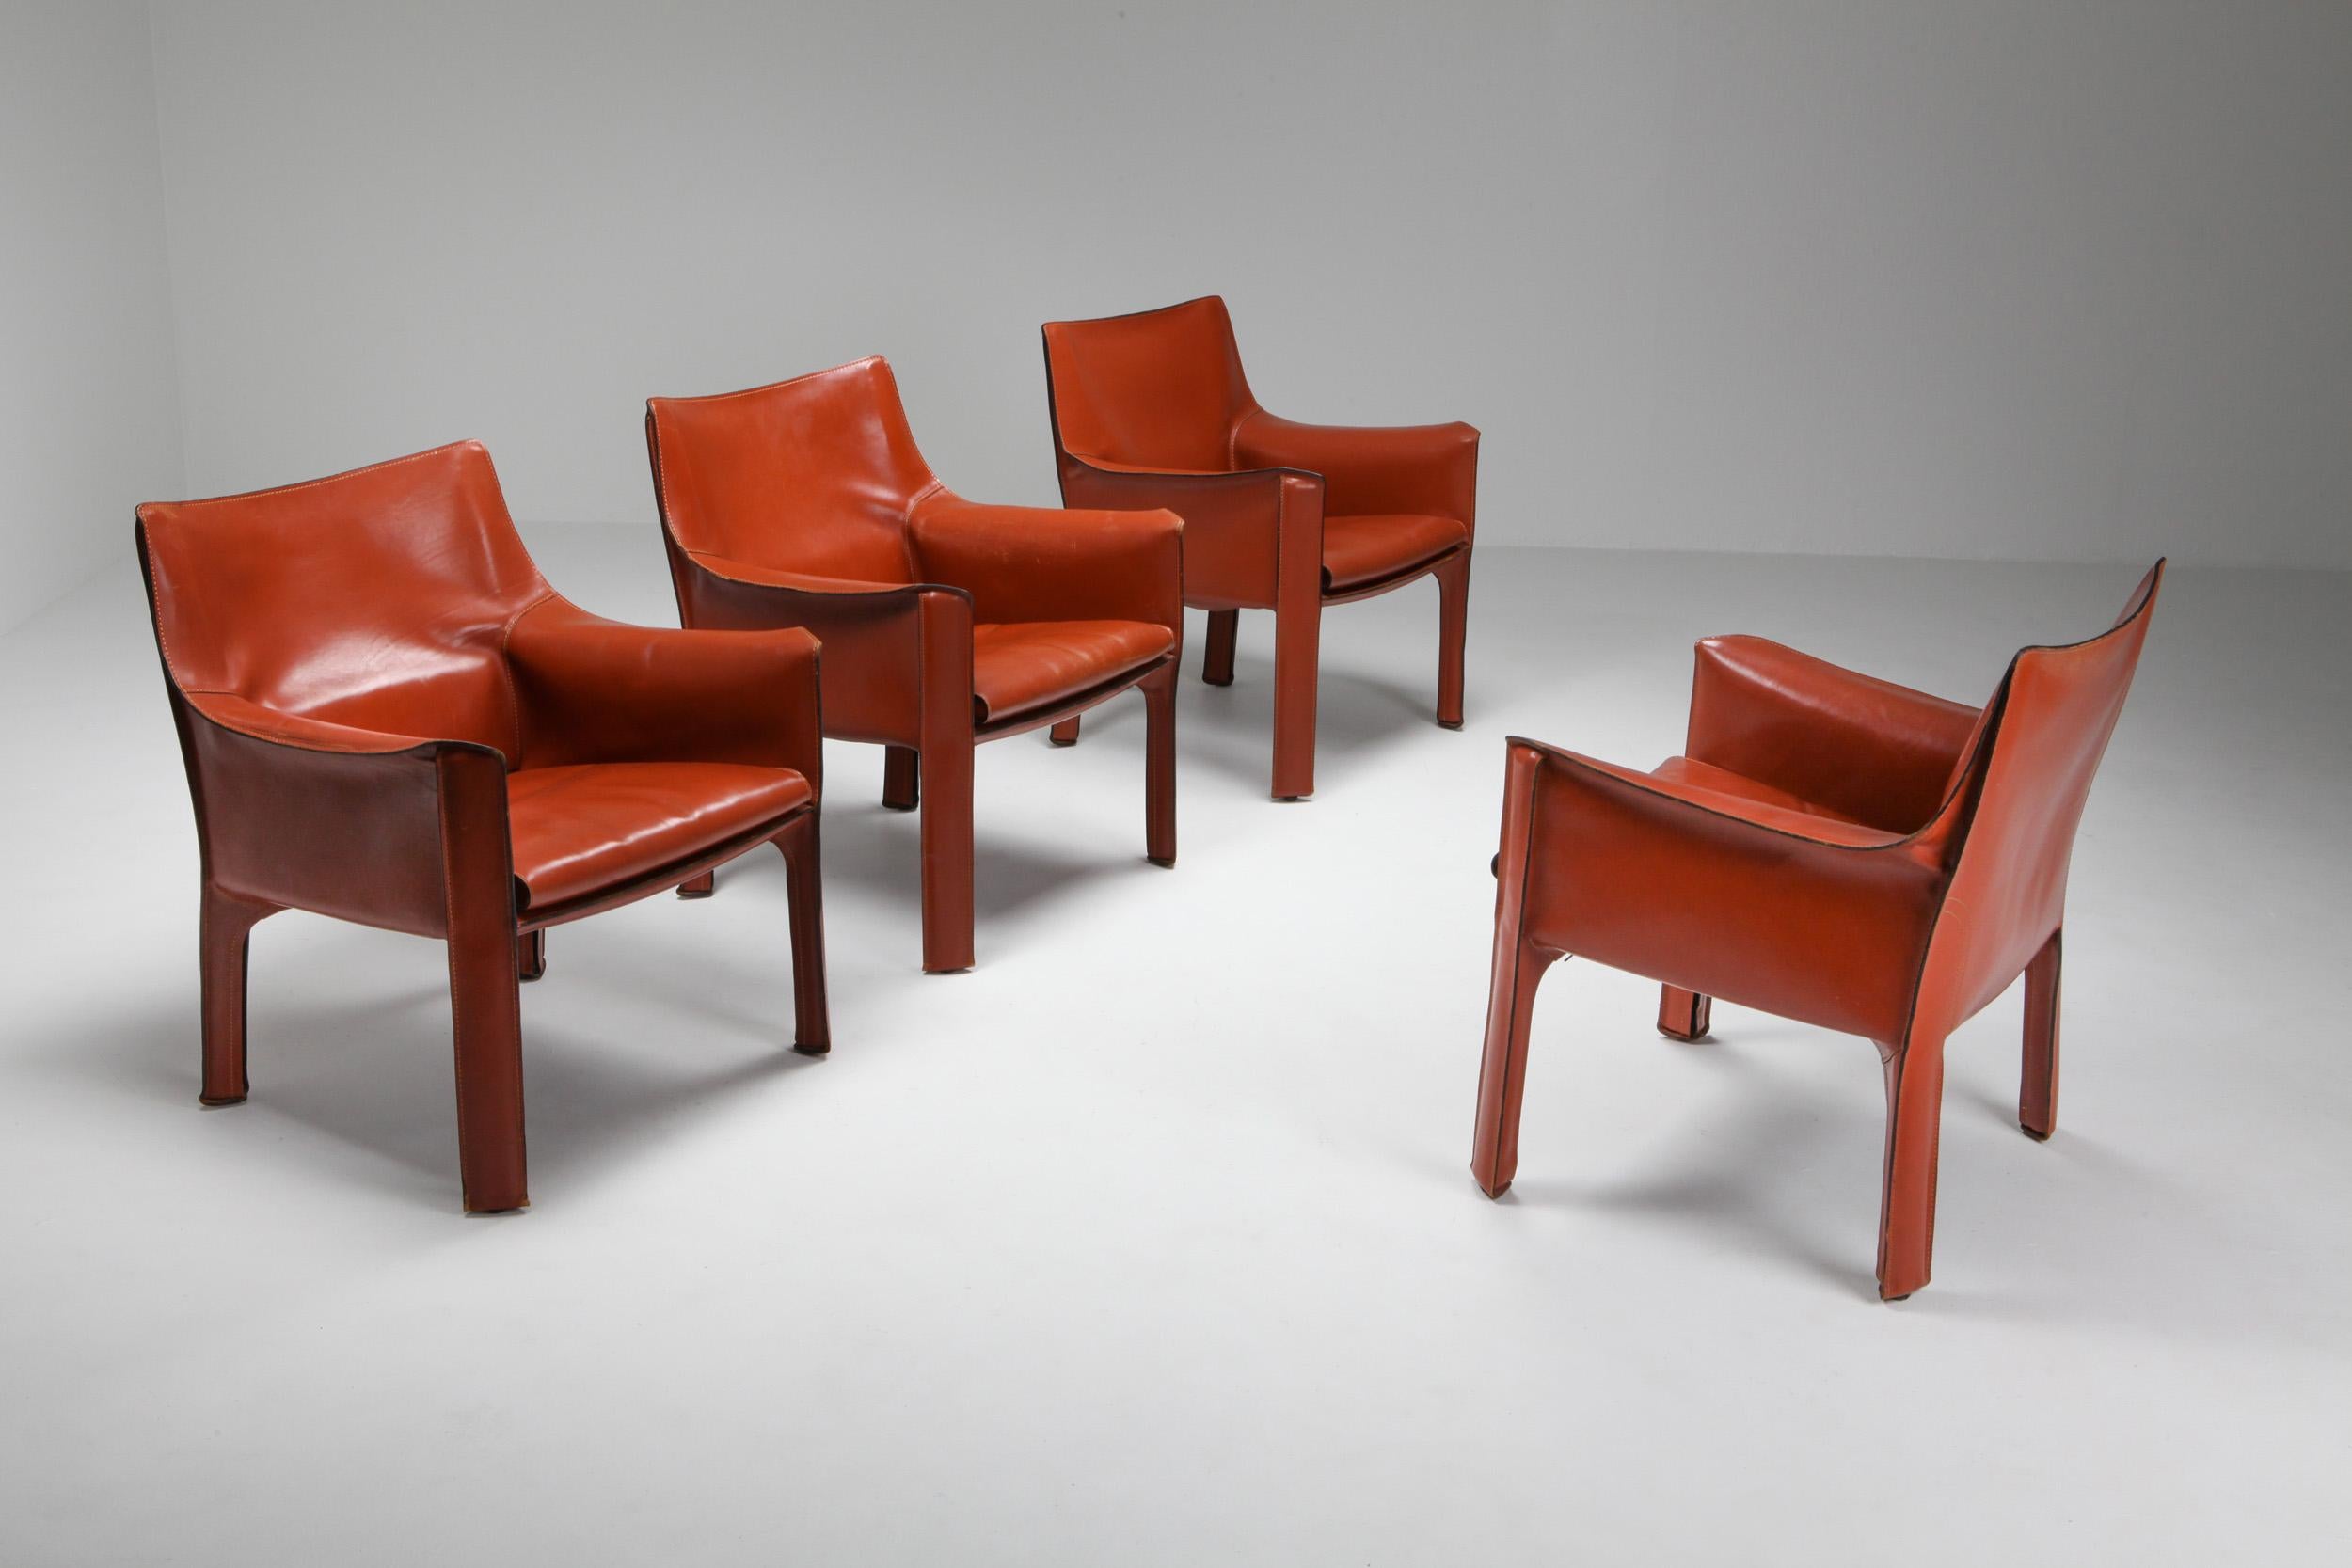 CAB 414 terracotta red easy chair, Mario Bellini, Cassina 1982; Armchair; Dining Chair; Italian Design; Italian classics; Side Chair; Leather chair

CAB Catalog I Contemporanei 
Year of production: 1982
Armchair and settee with enameled steel